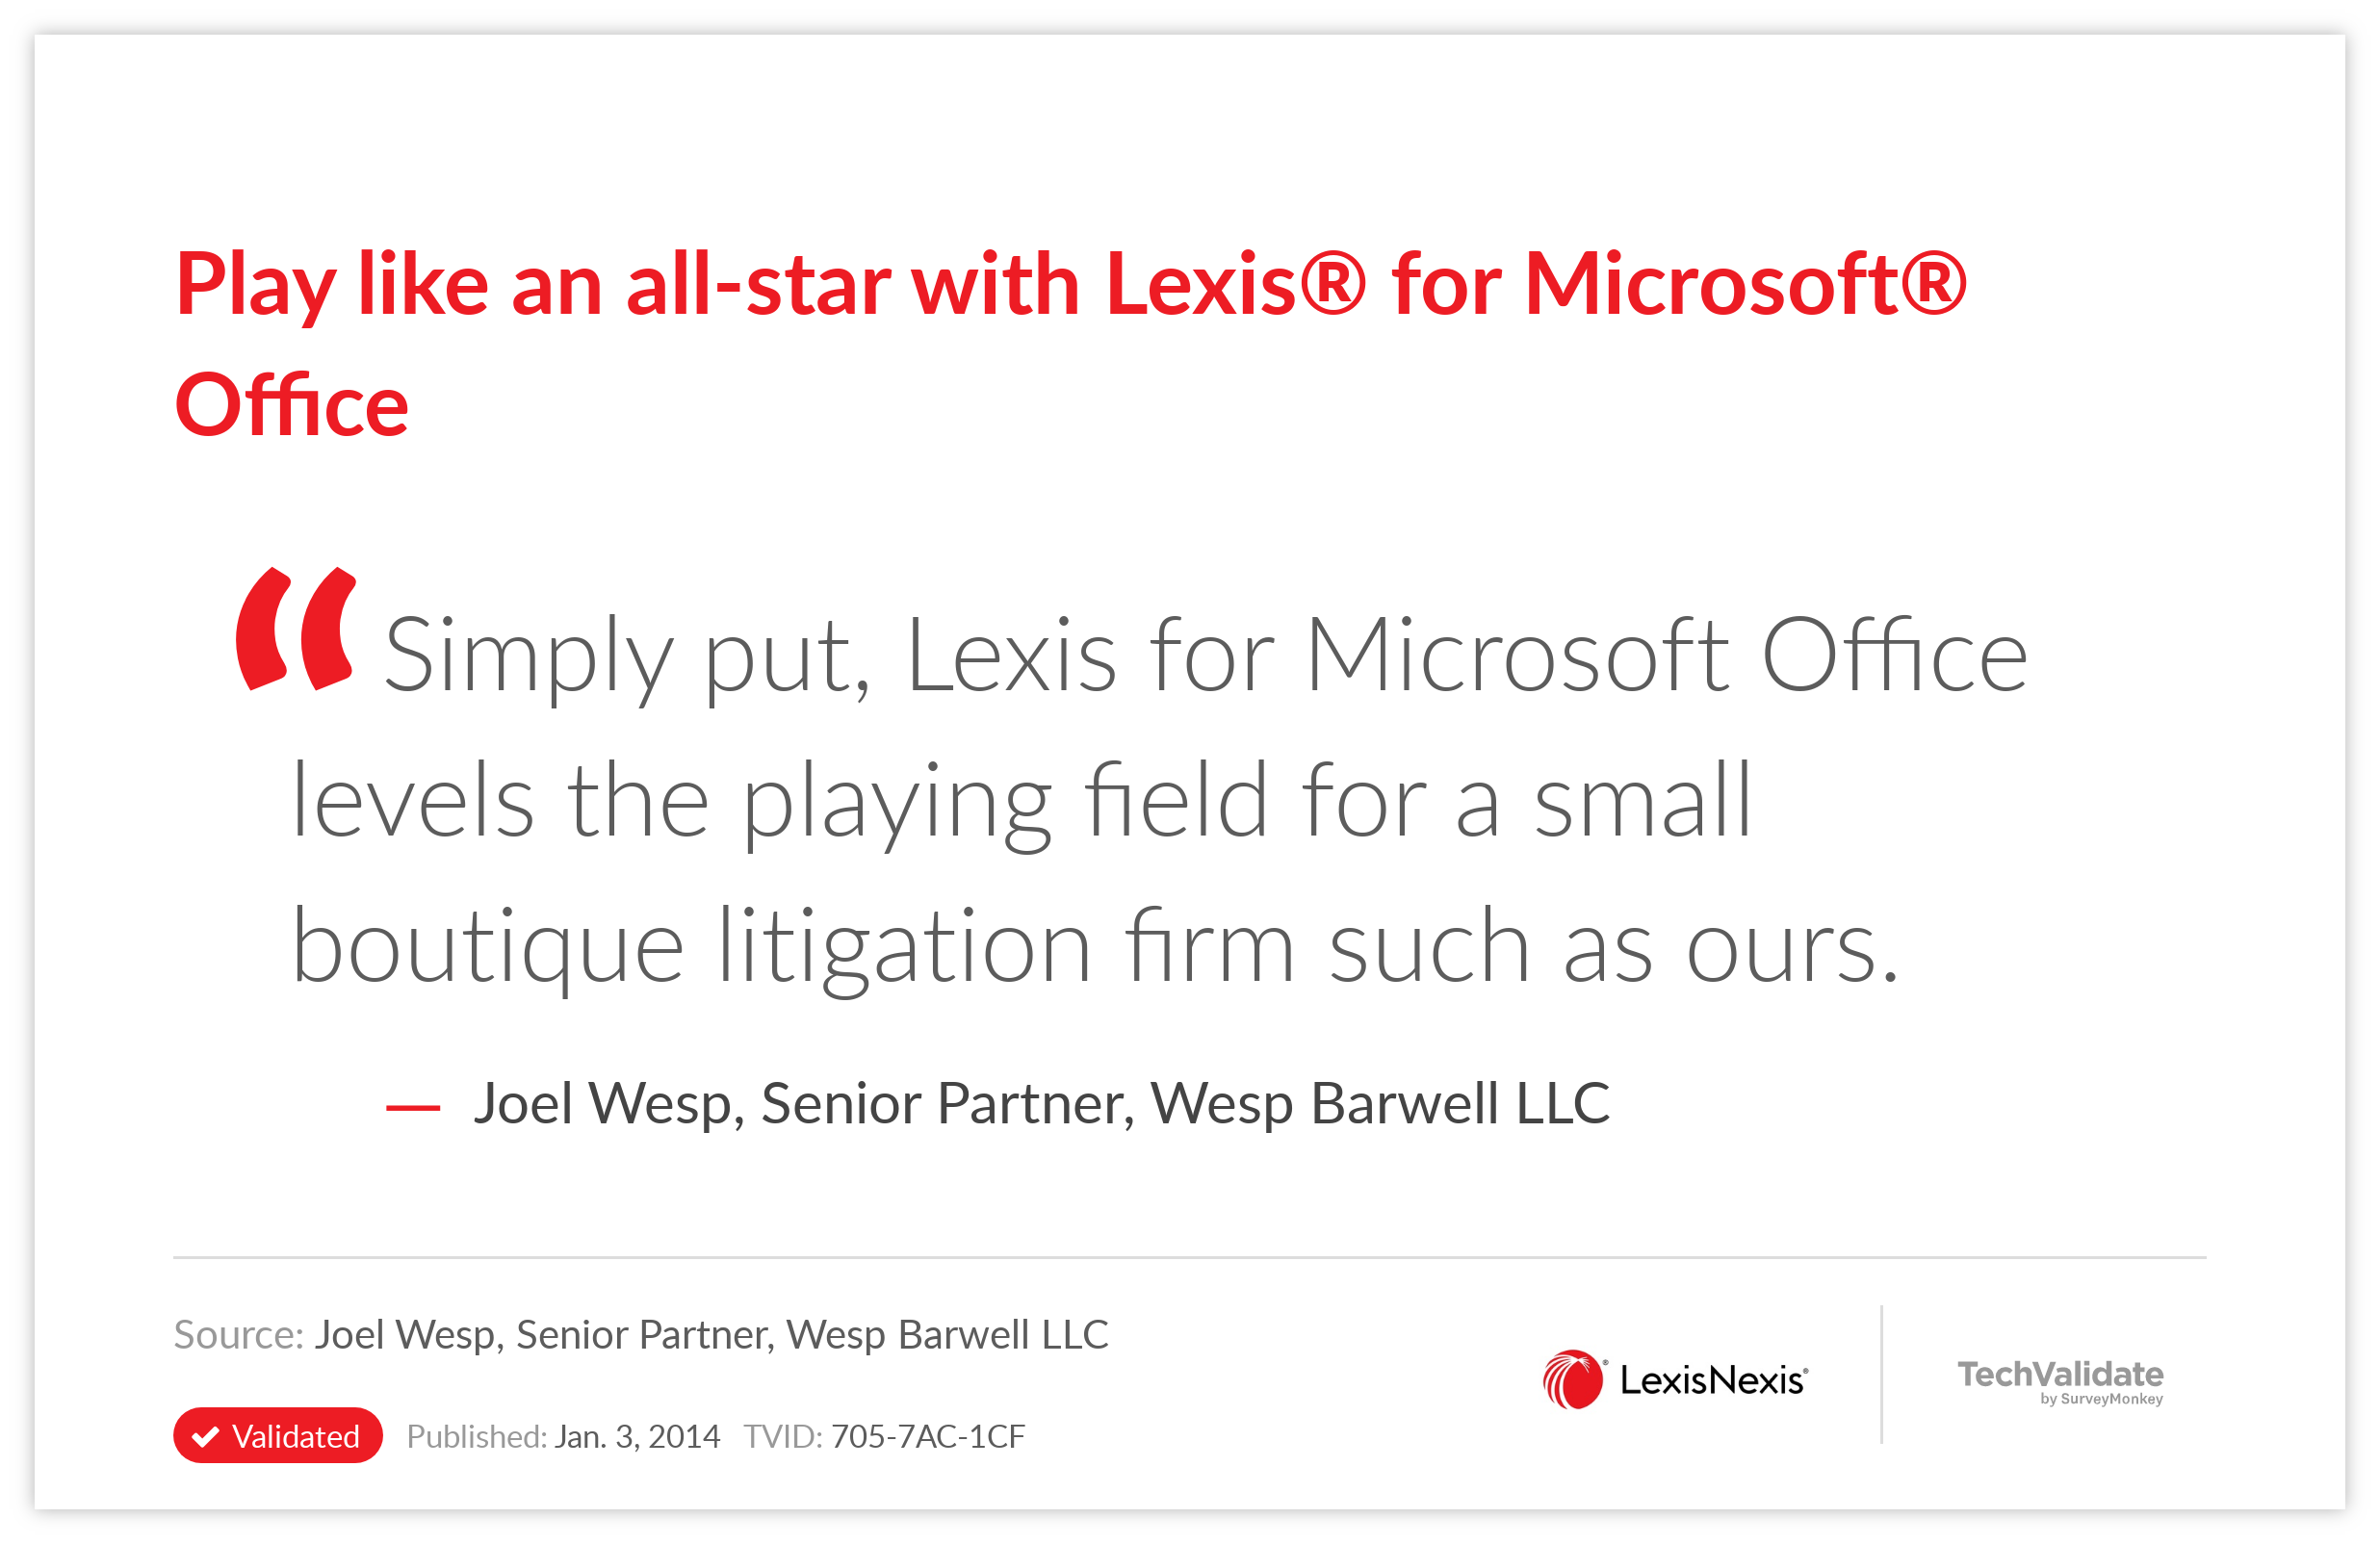 Play like an all-star with Lexis® for Microsoft® Office